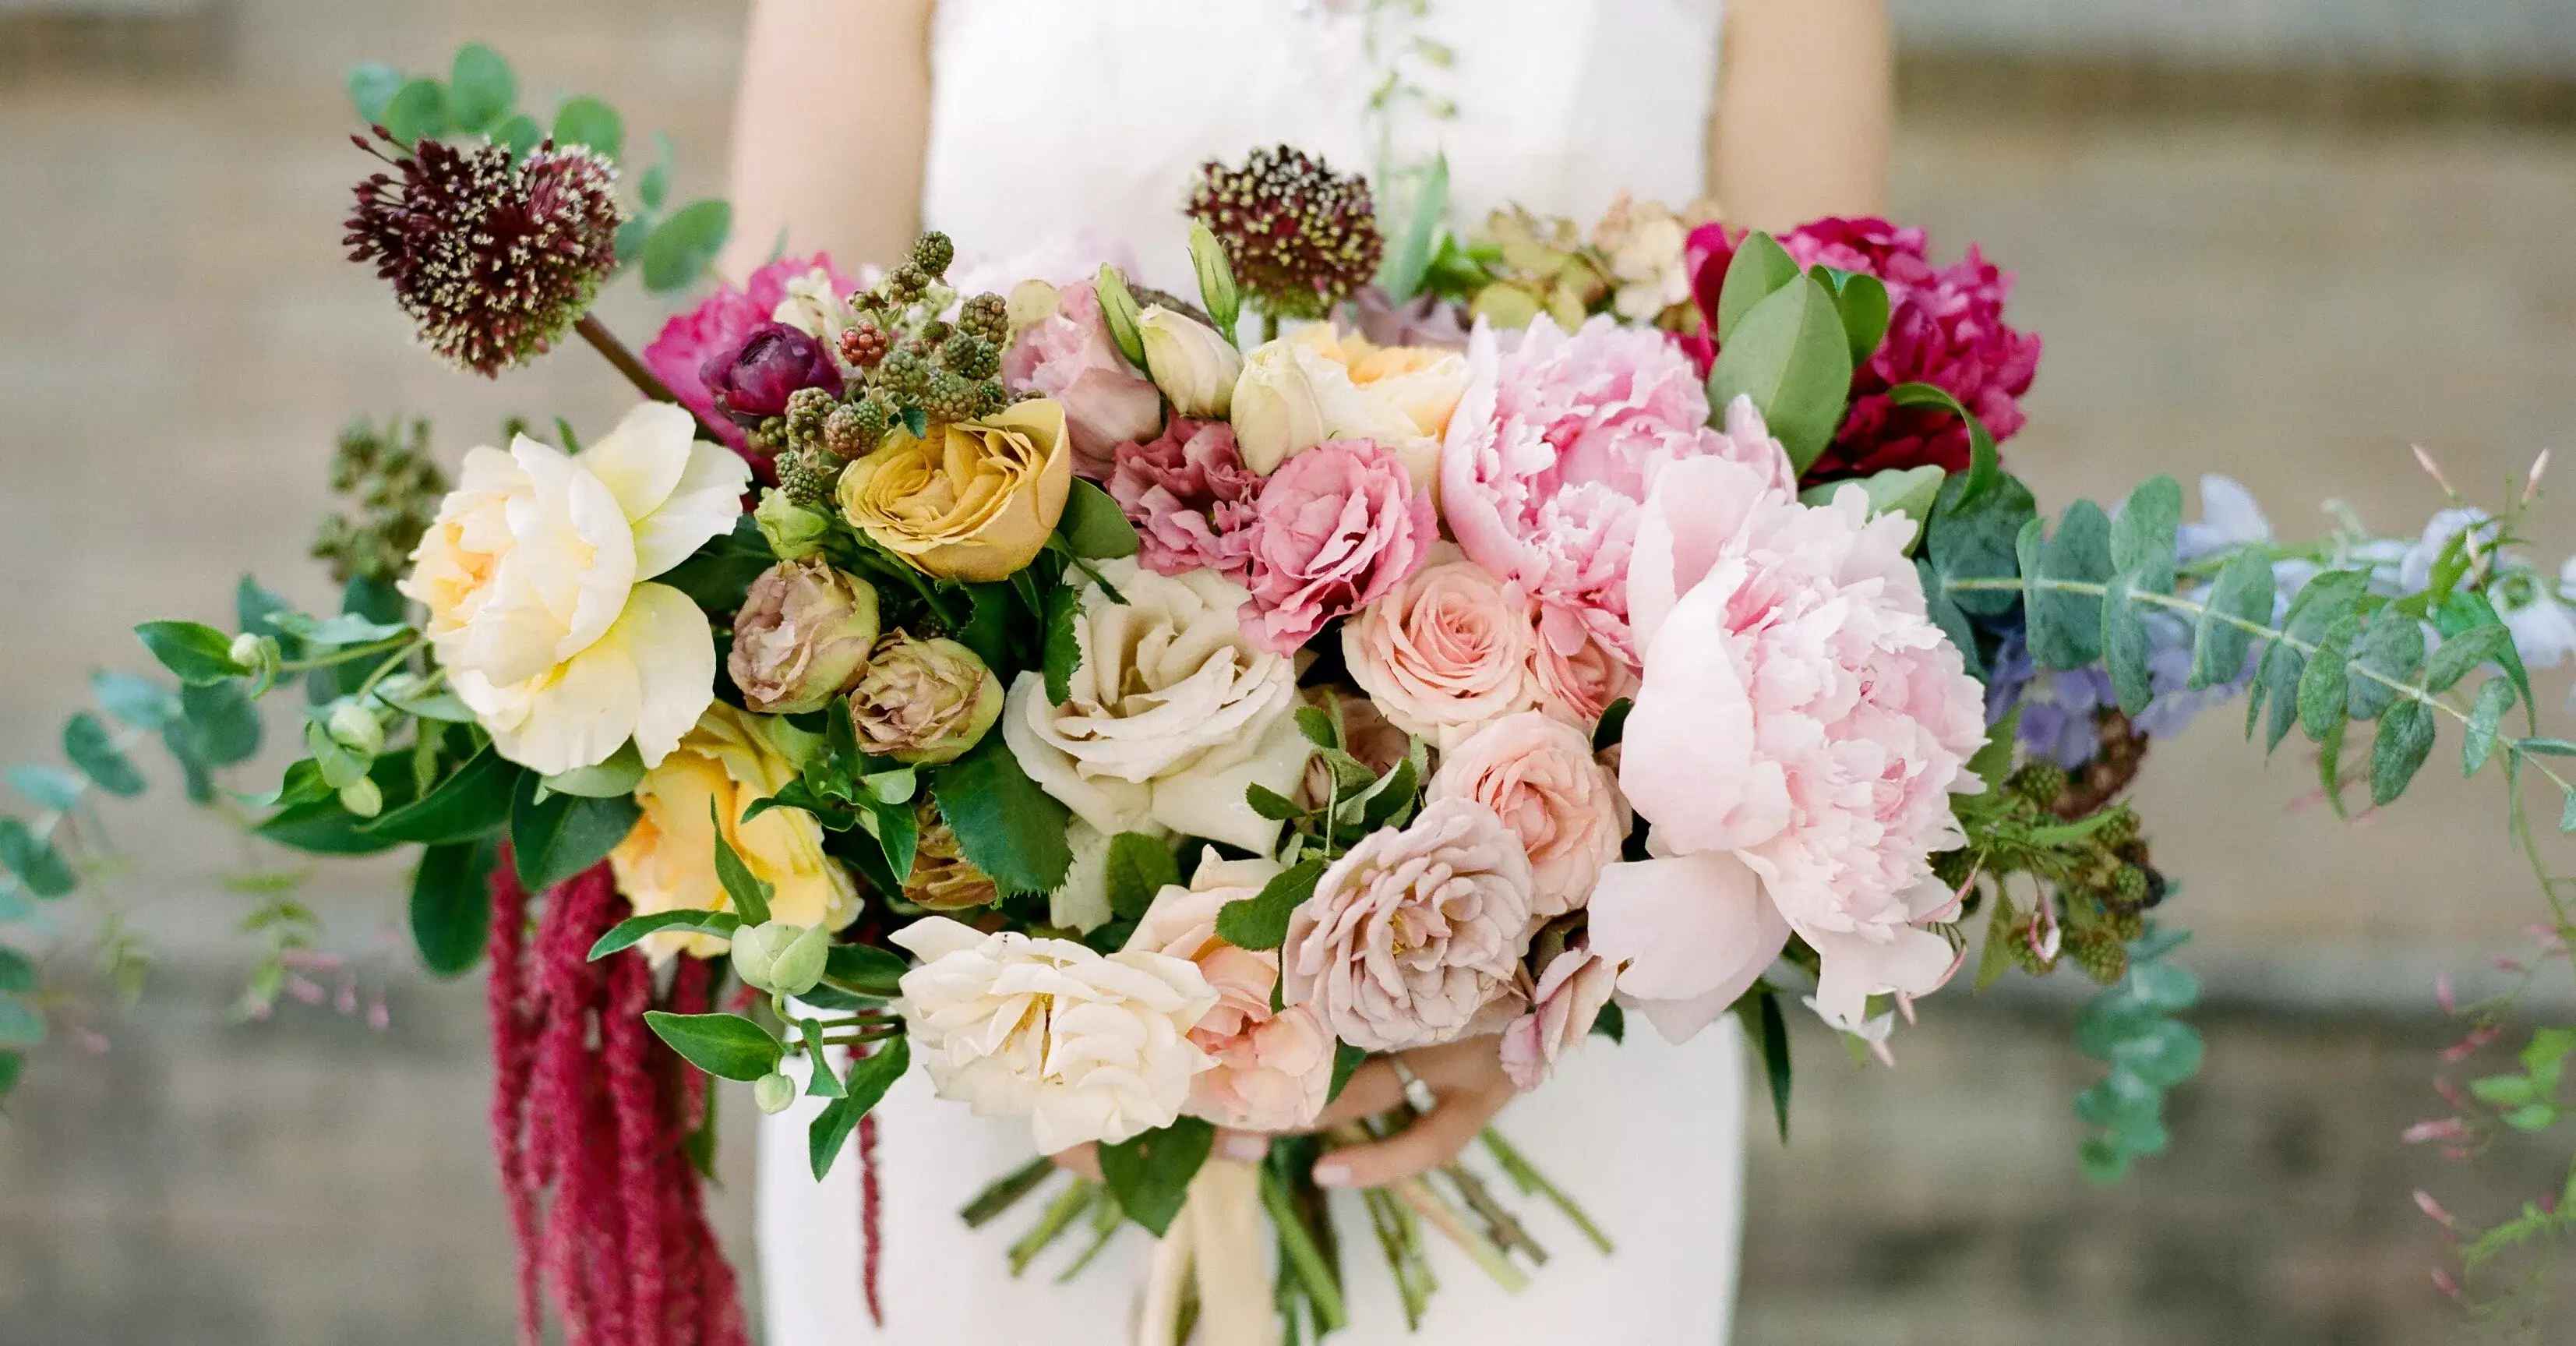 The Pros and Cons of Using Alternative Artificial Flowers for Your Wedding